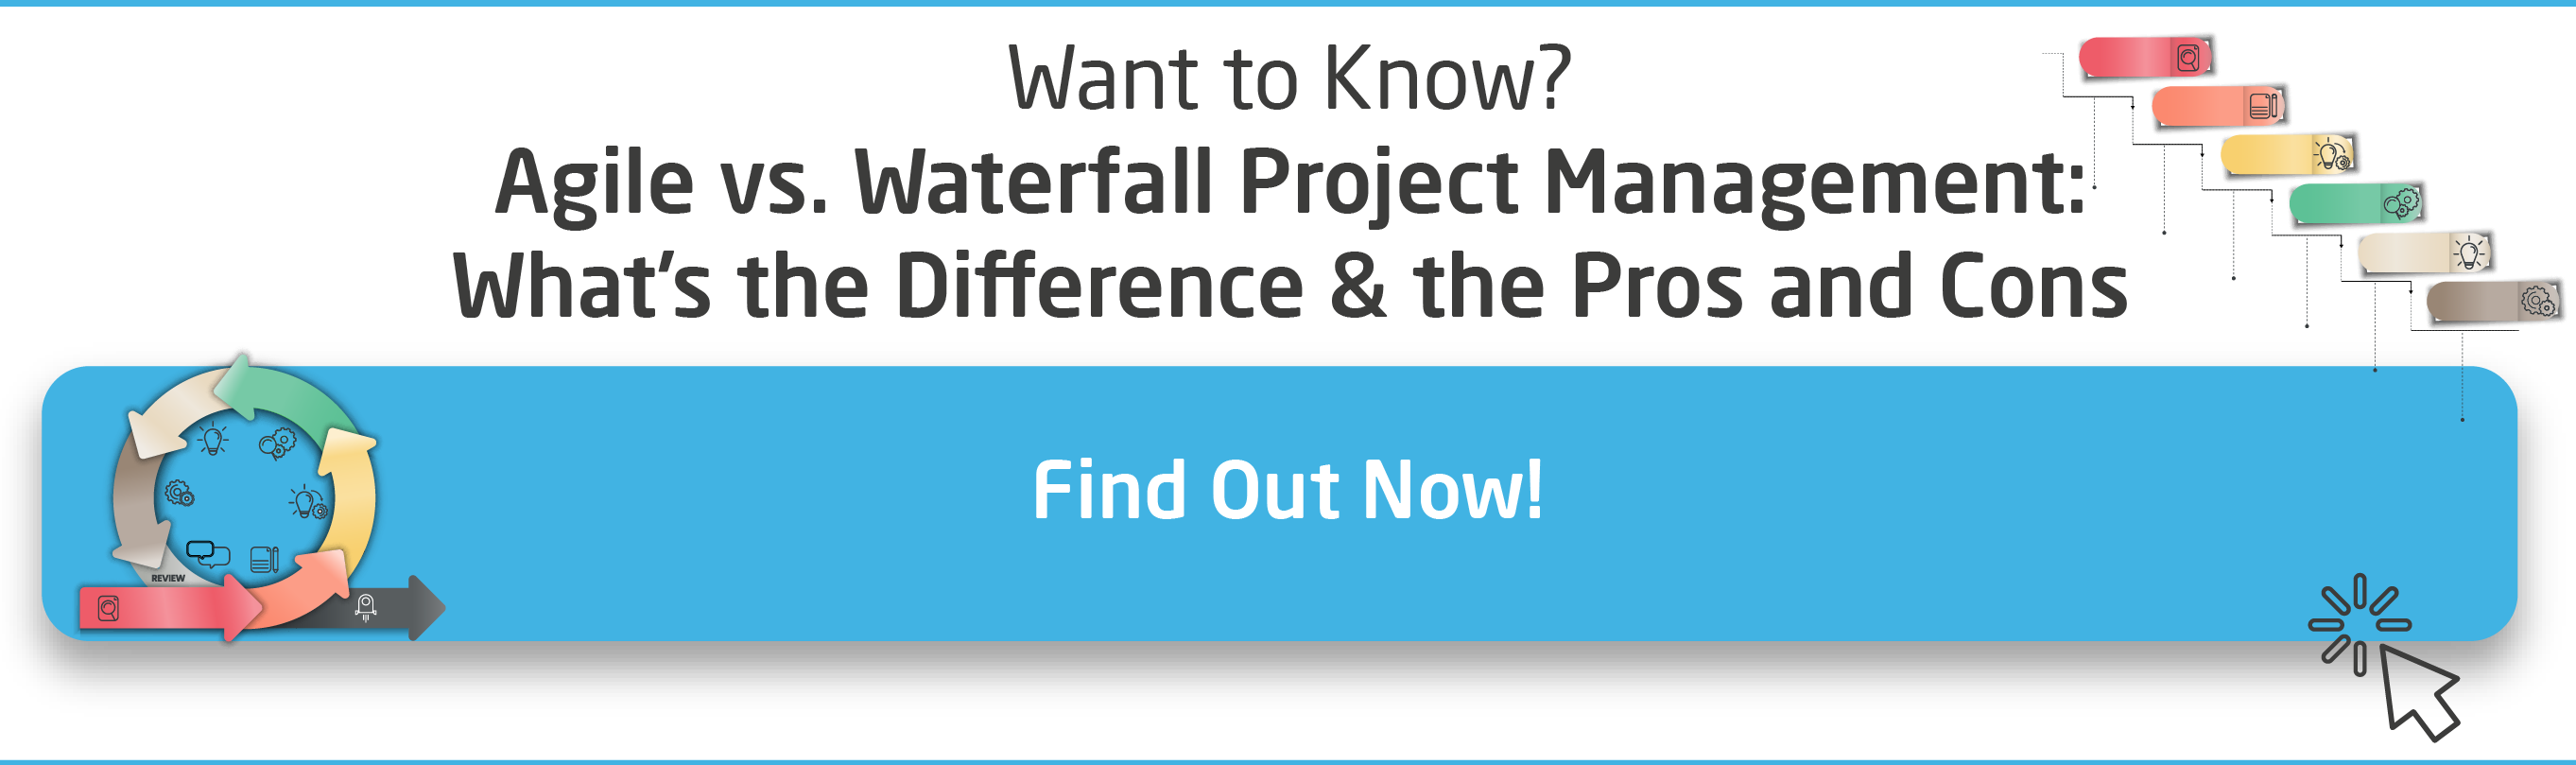 CTA_InArticle_Agile-vs-waterfall-project-management-benefits-and-drawbacks